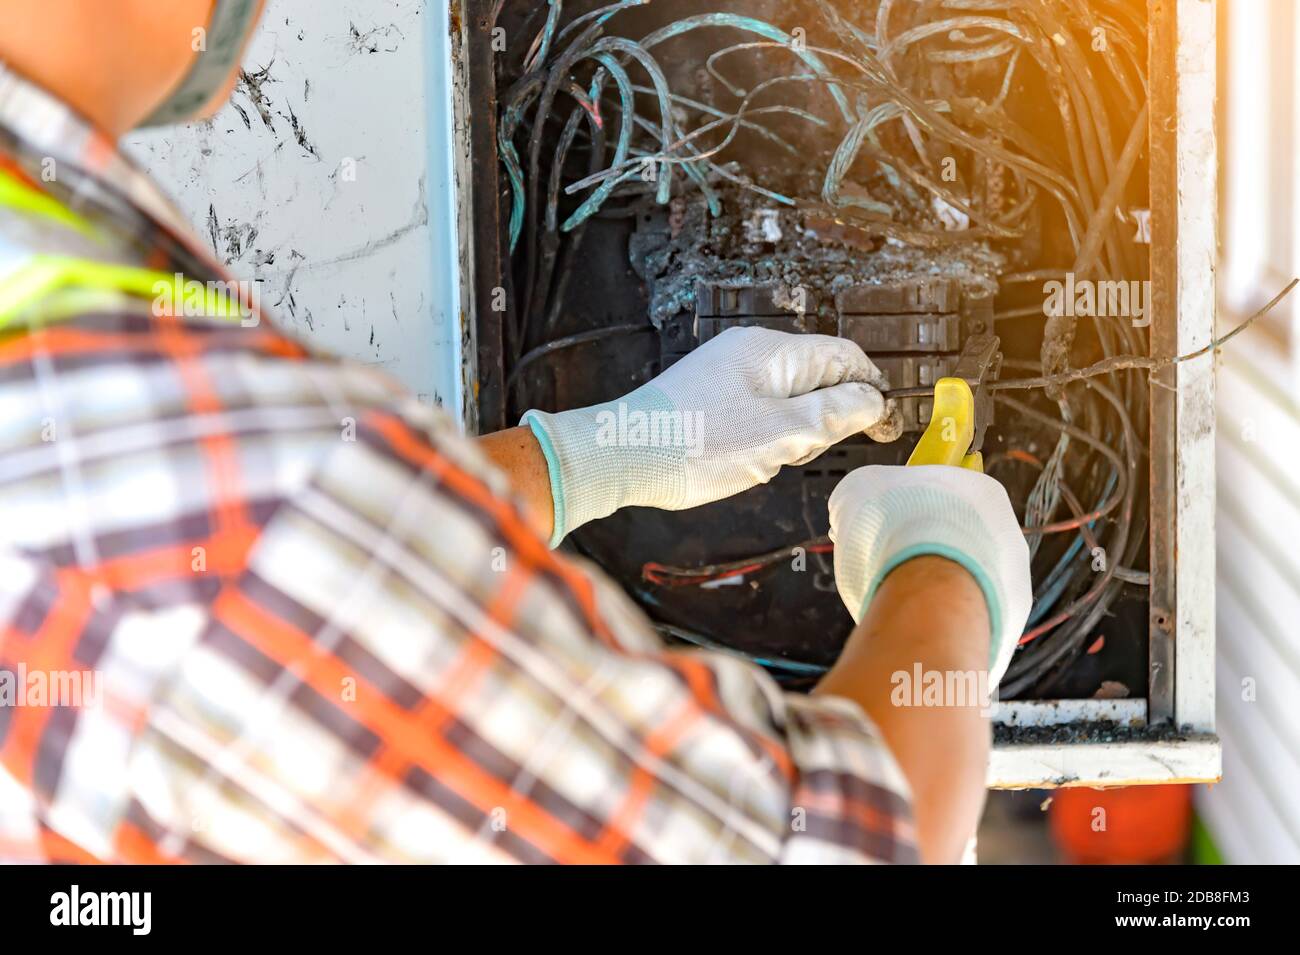 Electrician fixing a control panel after an electrical fire, Thailand Stock Photo